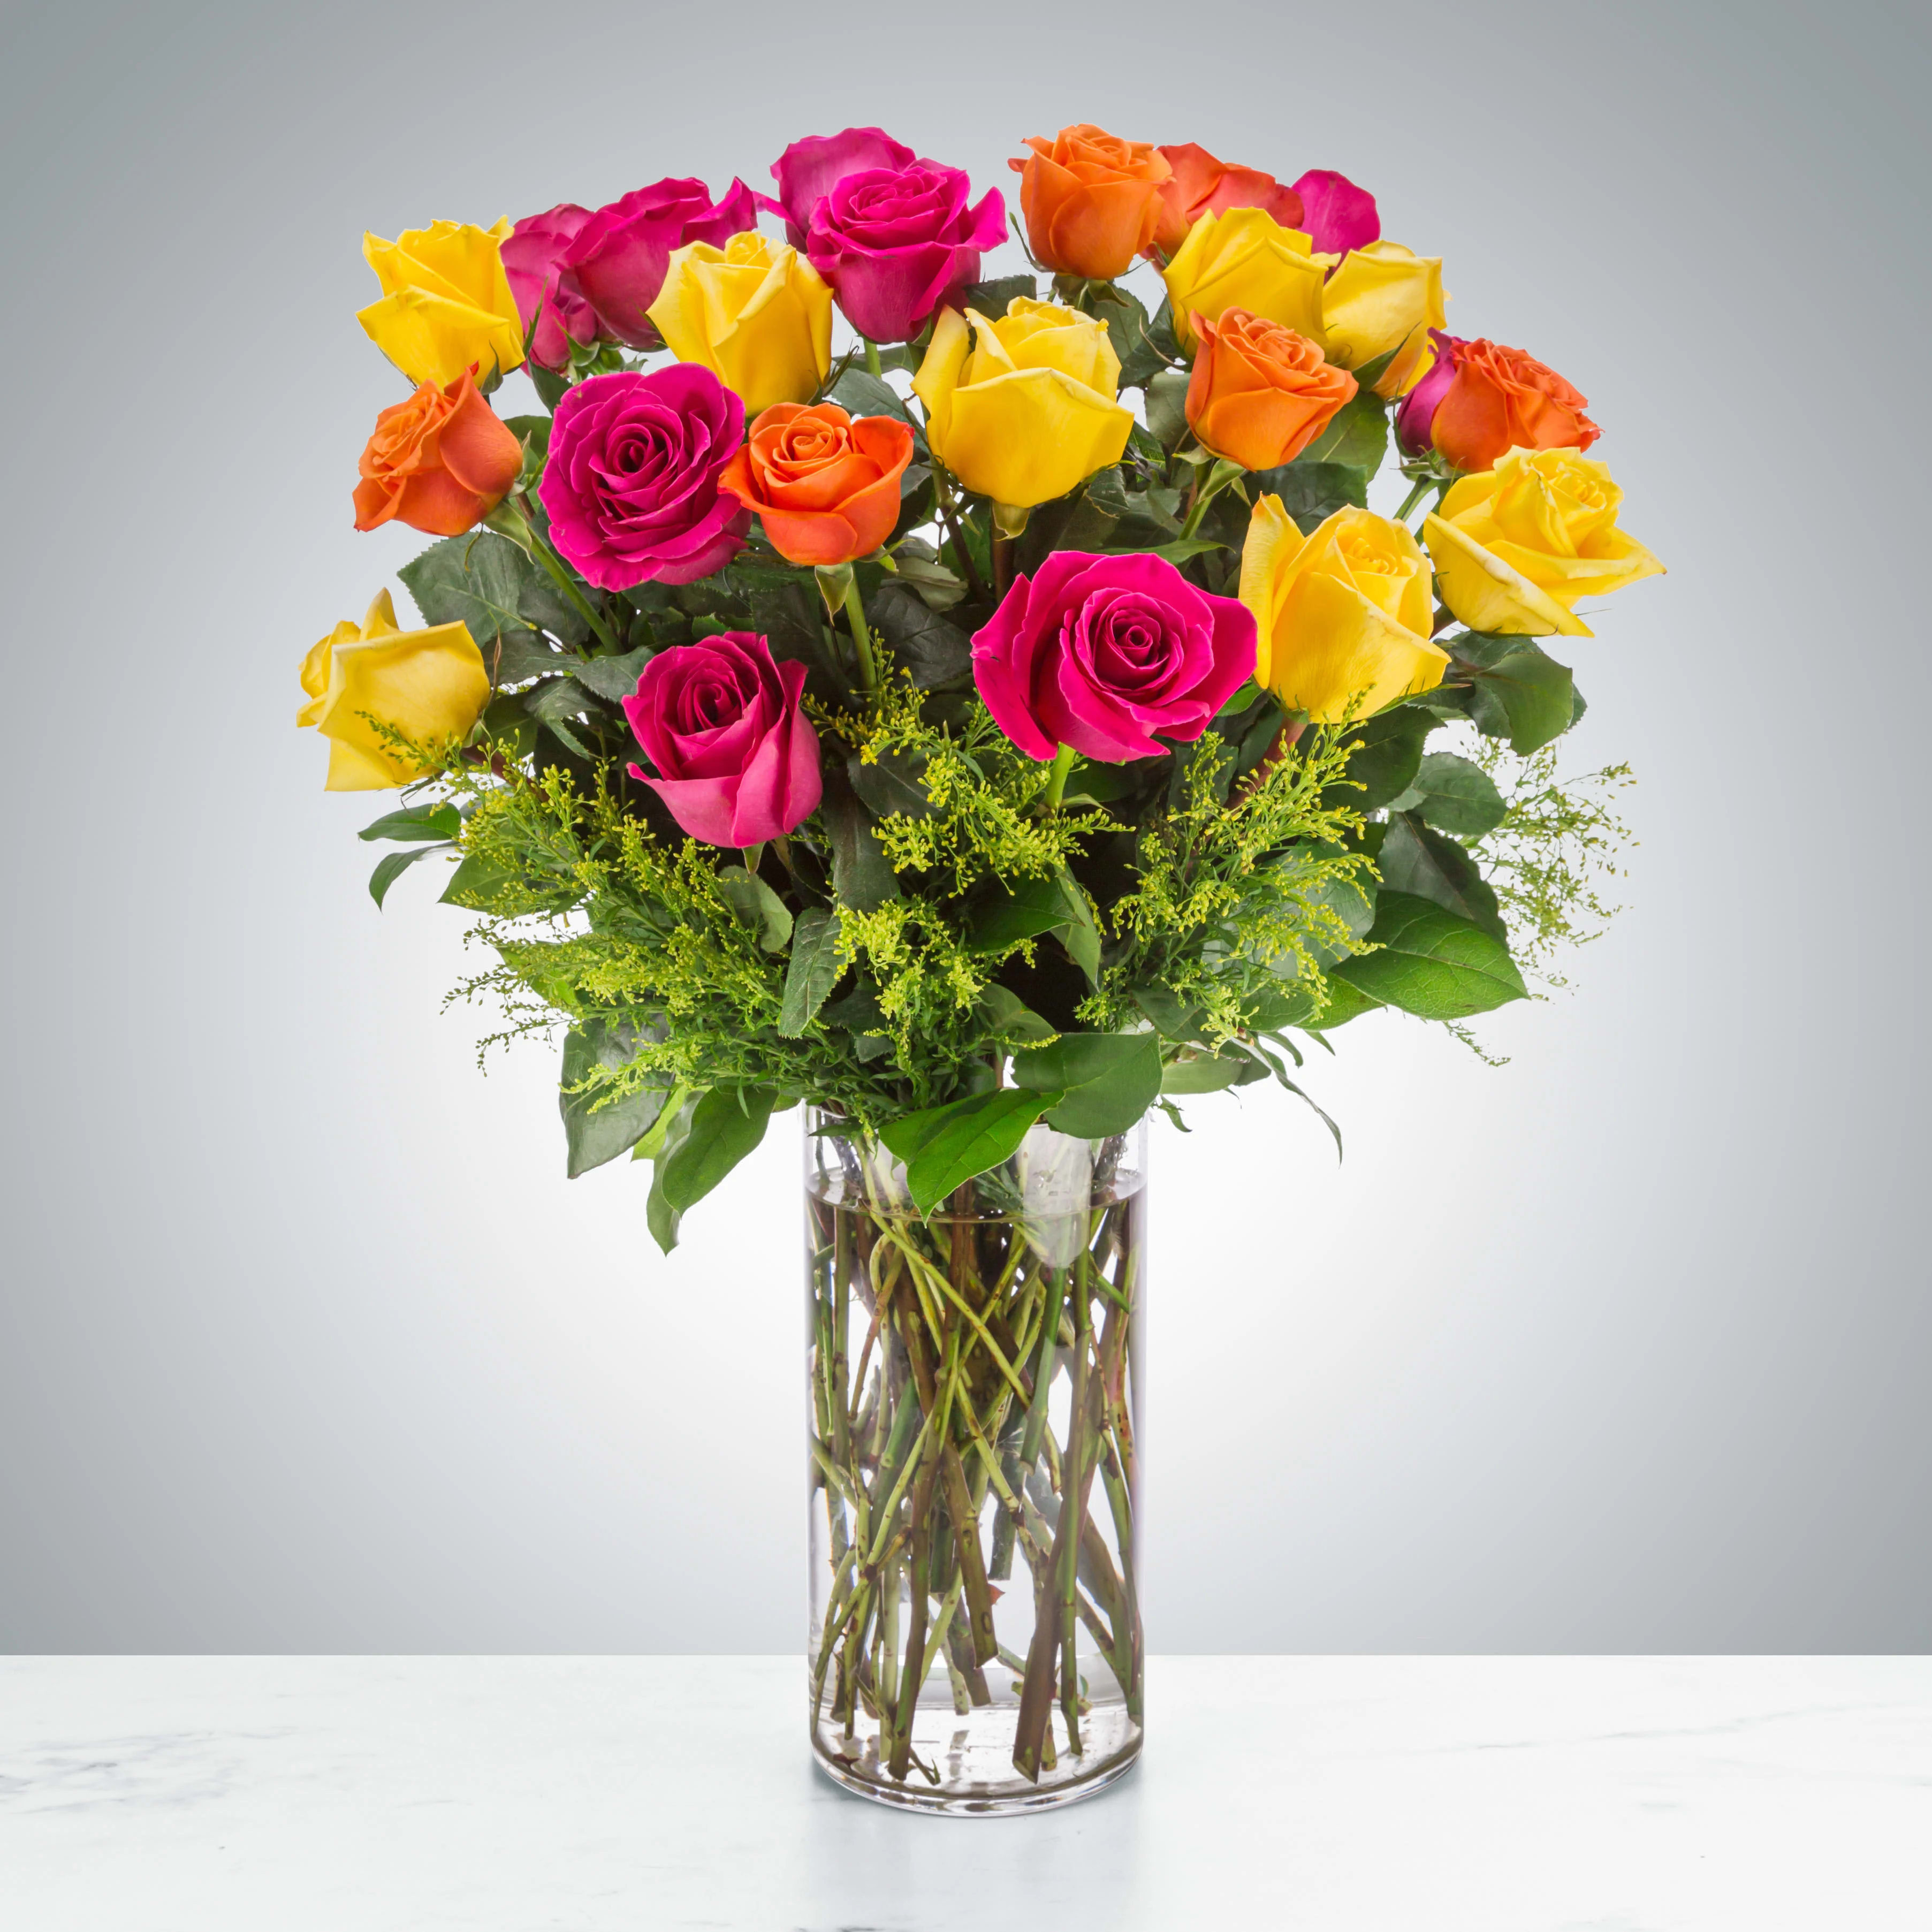 The Sound of Joy by BloomNation™ - 2 Dozen Yellow, Orange and Hot Pink Roses. Send an explosion of color with this long-stemmed rose arrangement. A great alternative to the classic red rose, send a giant arrangement of multicolored bright roses.  Approximate Dimensions: 20''D x 28&quot;&quot;H